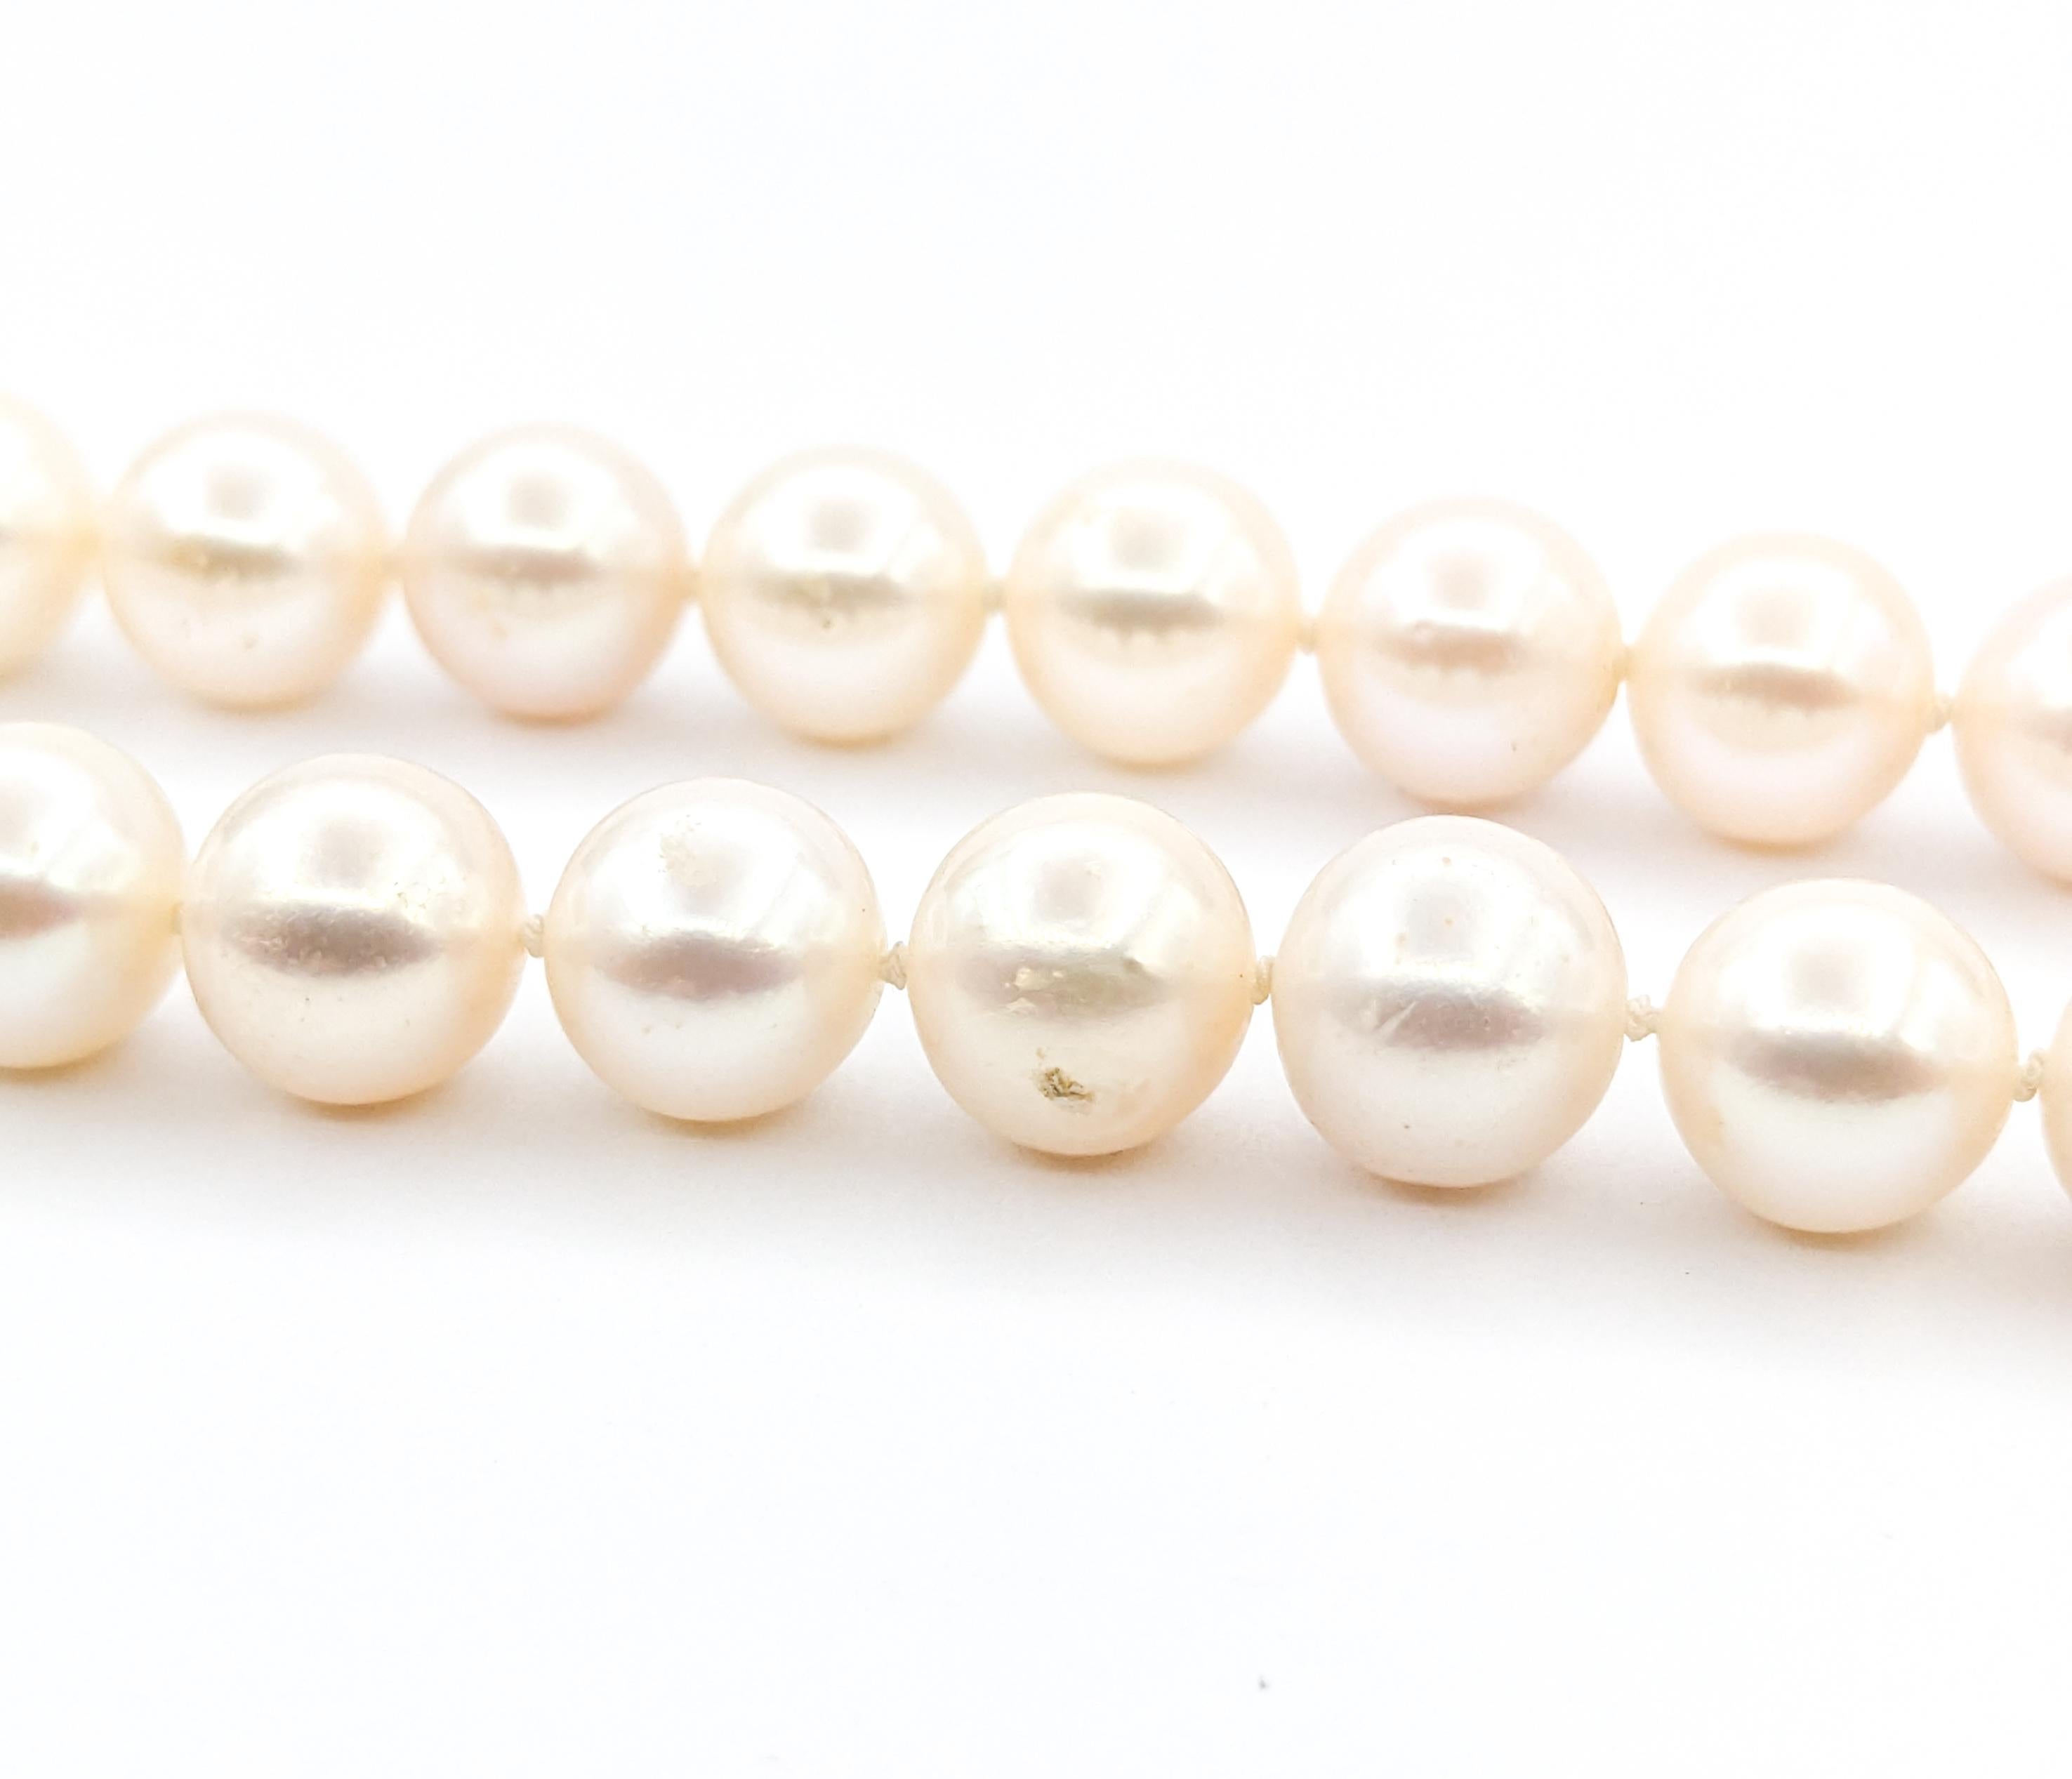 8.75-9mm South Sea Pearls Necklace In Yellow Gold

Introducing this elegant Gemstone Fashion Necklace Strand, meticulously crafted in 14kt yellow gold. This exquisite piece features lustrous 8.75-9mm South Sea Pearls, carefully selected for their